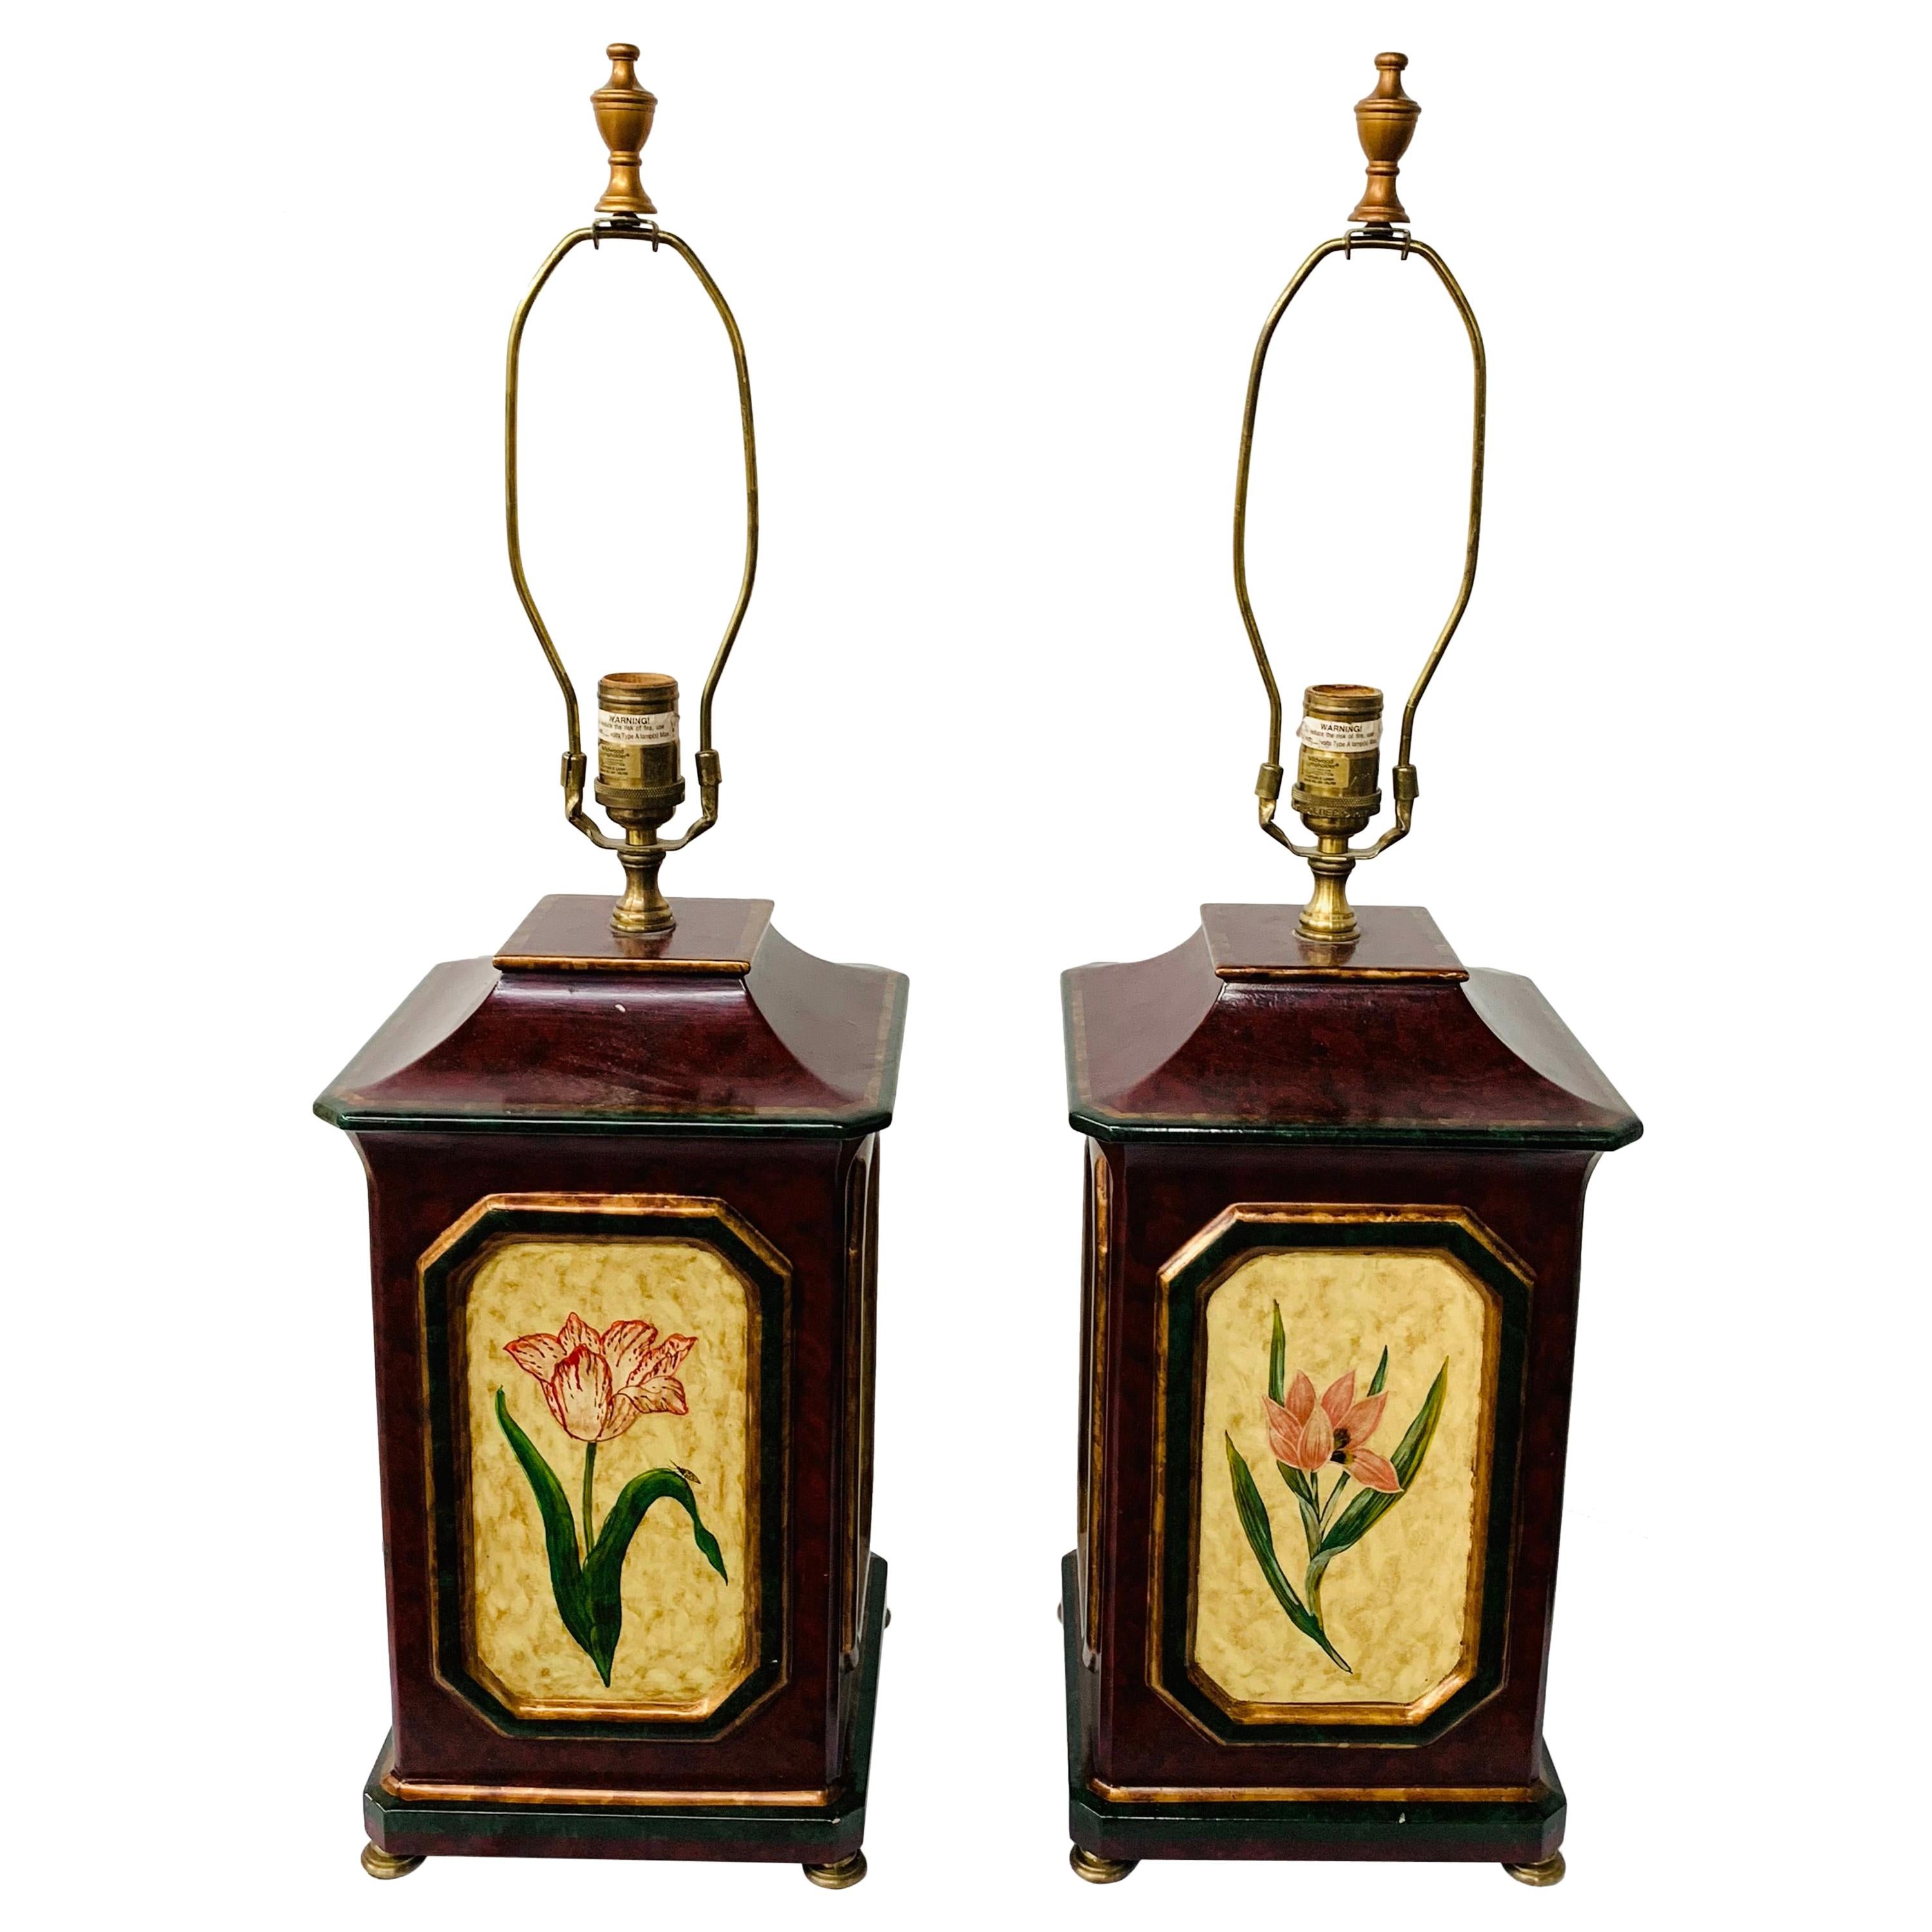 Oriental Hand-painted Wooden Table Lamp with Floral Decoration, a Pair For Sale